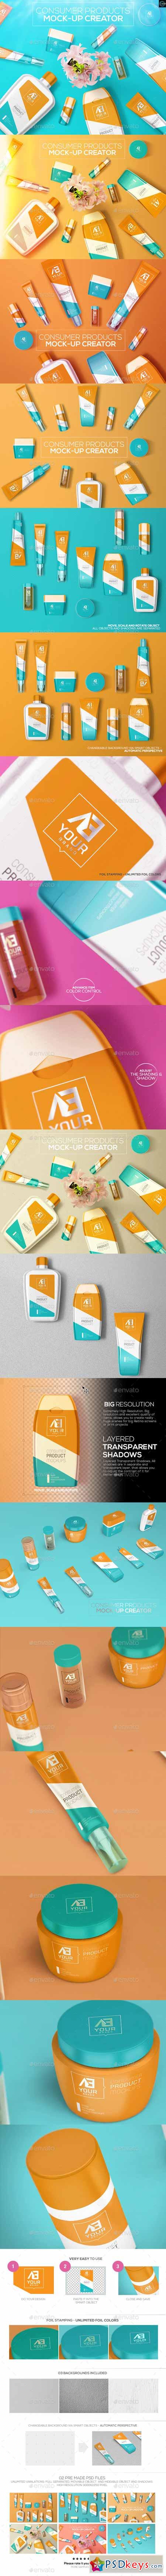 Consumer Products Mock-up 11551053